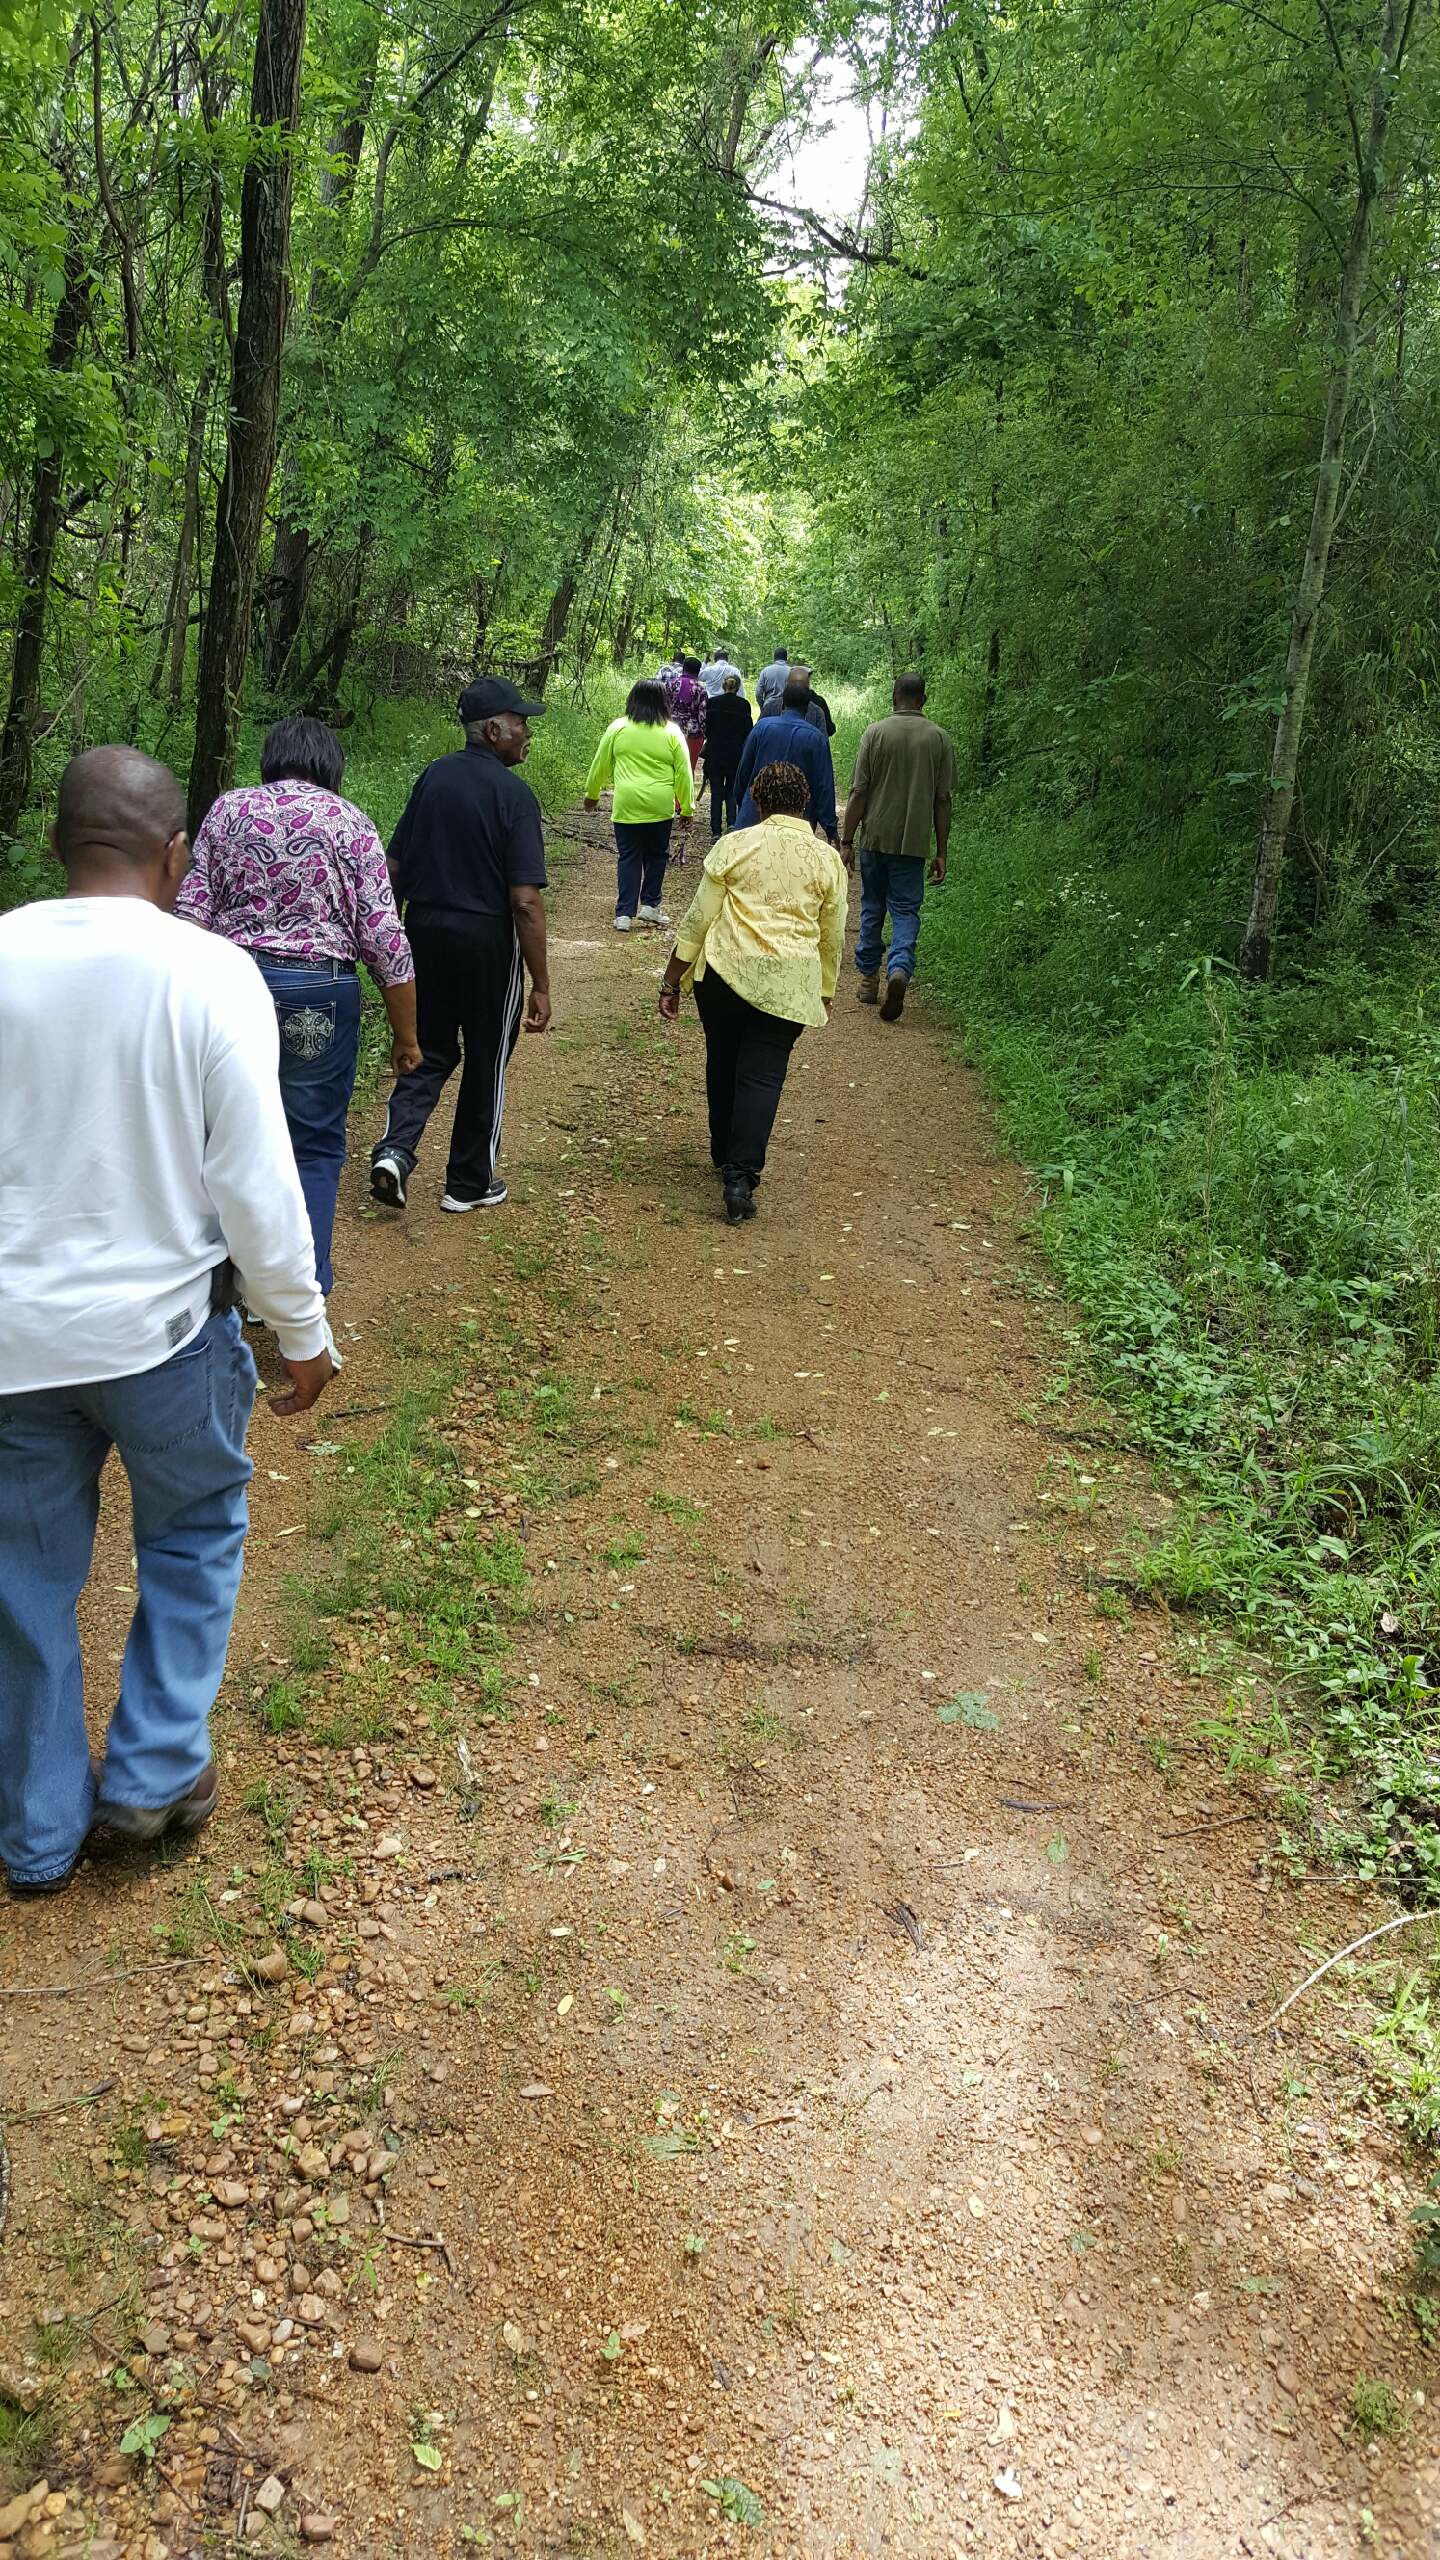 April 2016, Perk Spearheaded the Family to View the Land